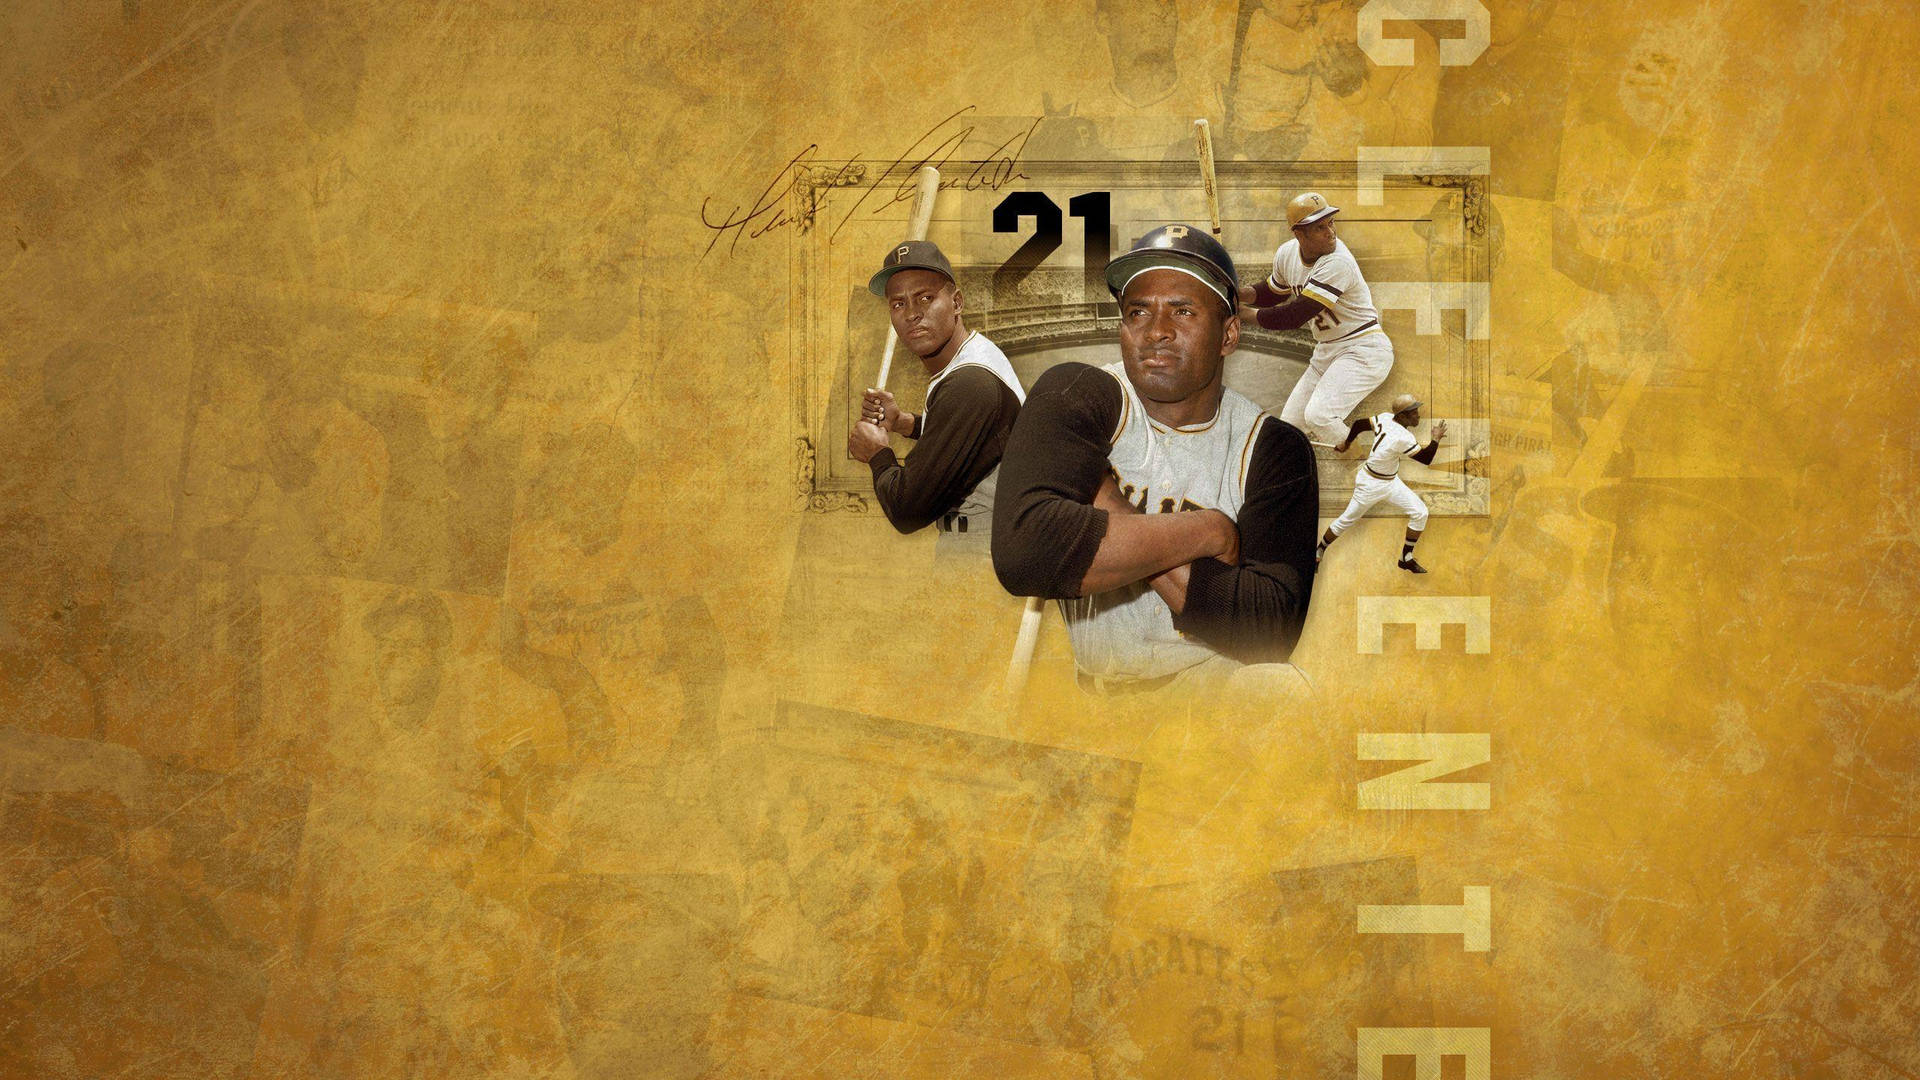 Roberto Clemente Aesthetic Poster